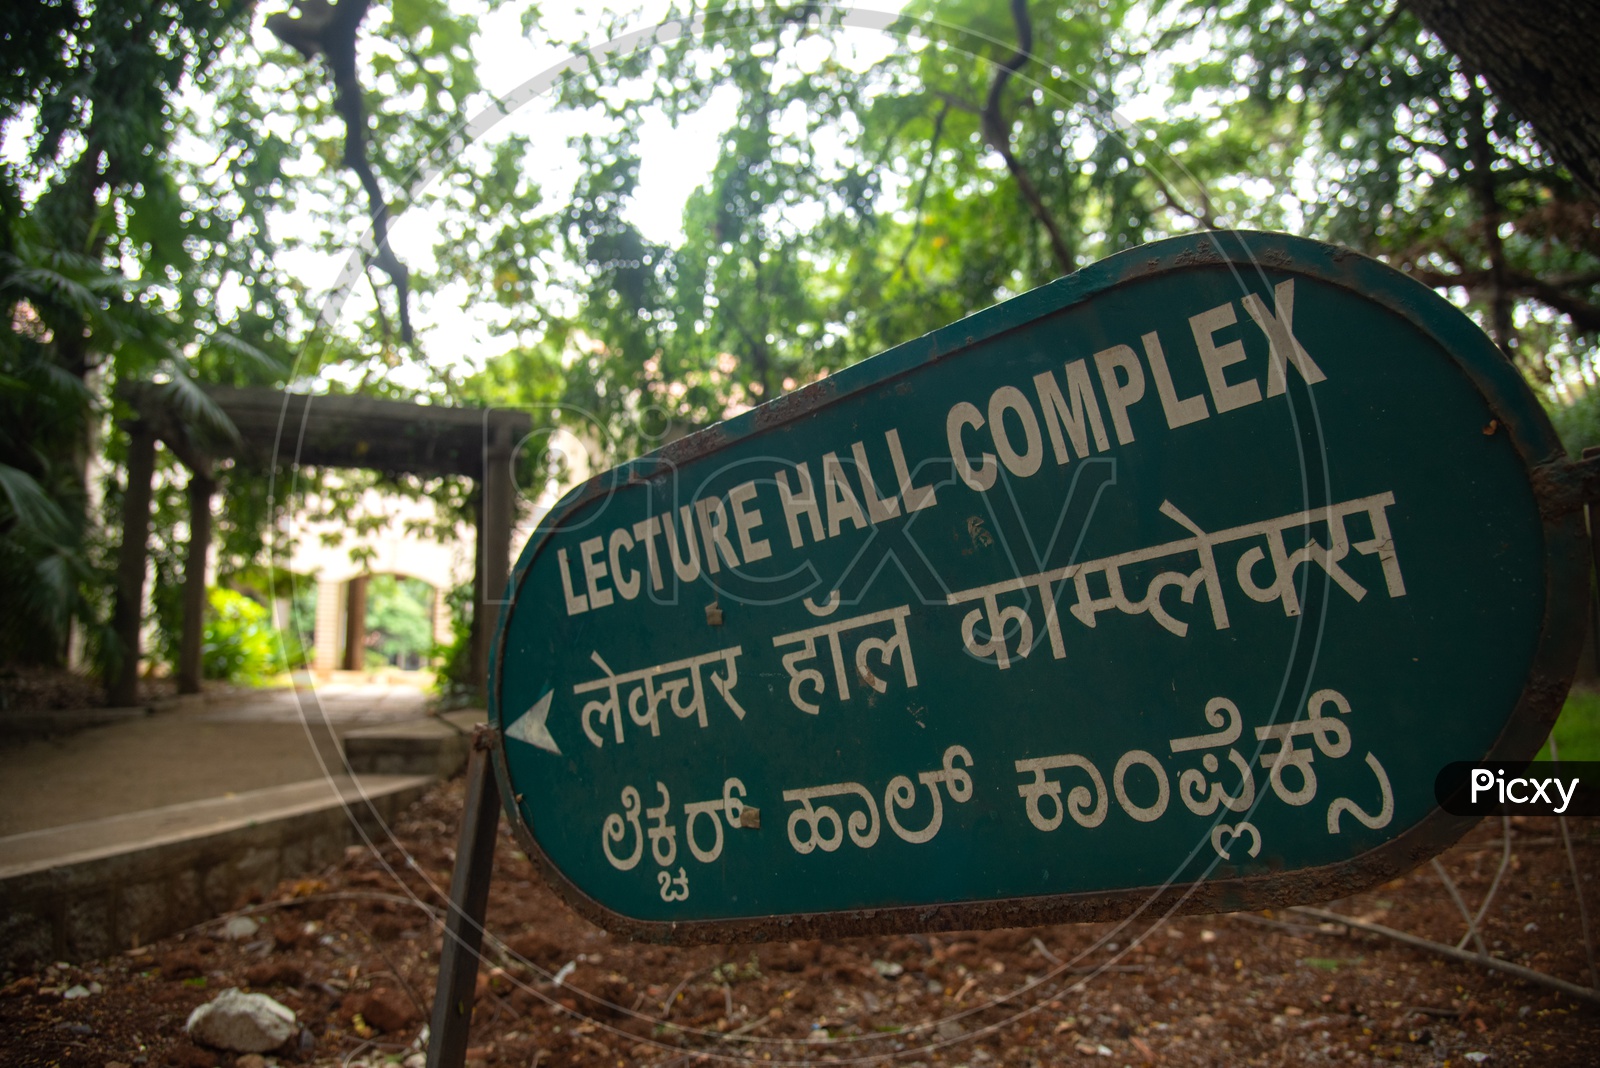 Lecture Hall Complex area in  Indian Institute of Science, Bangalore